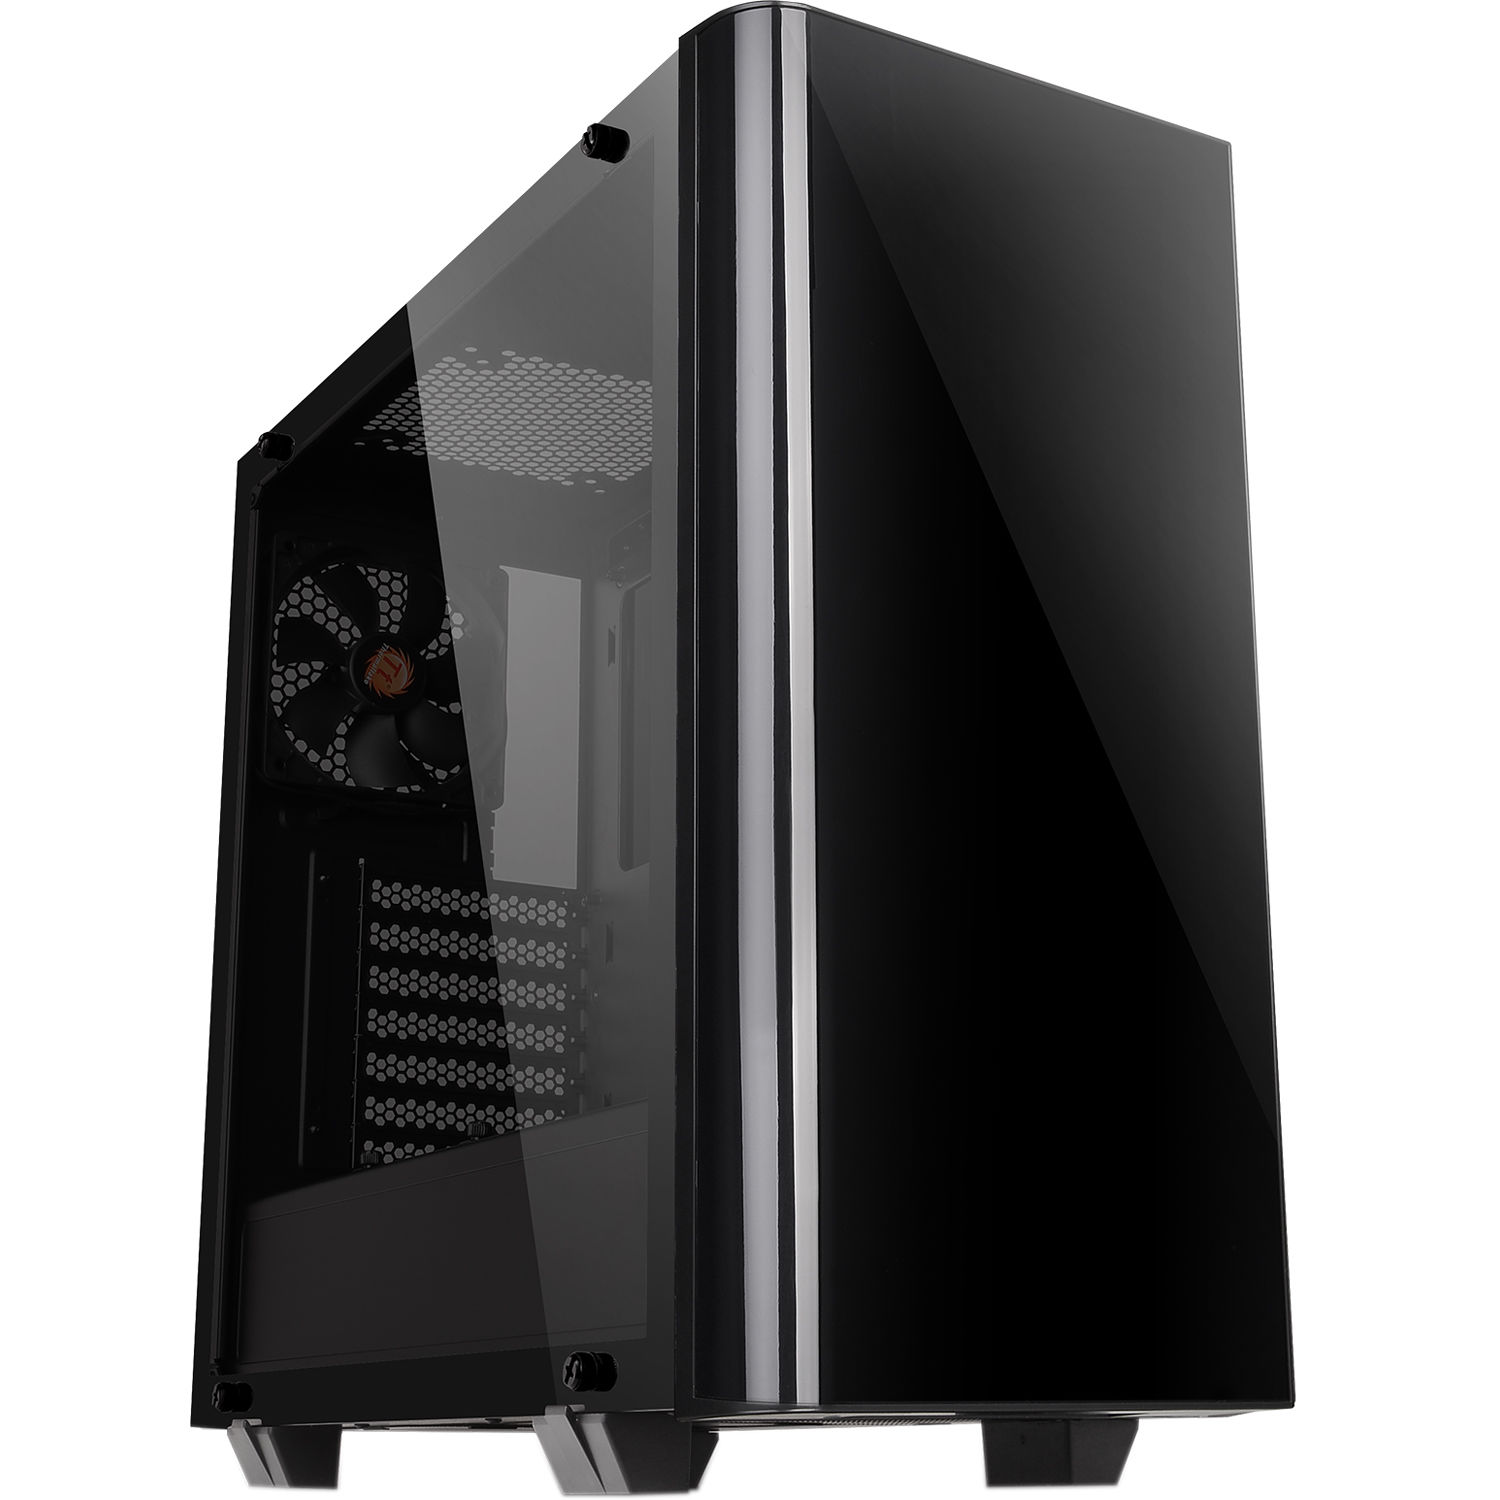 thermaltake_ca_1i3_00m1wn_00_view_21_tempered_glass_1354109